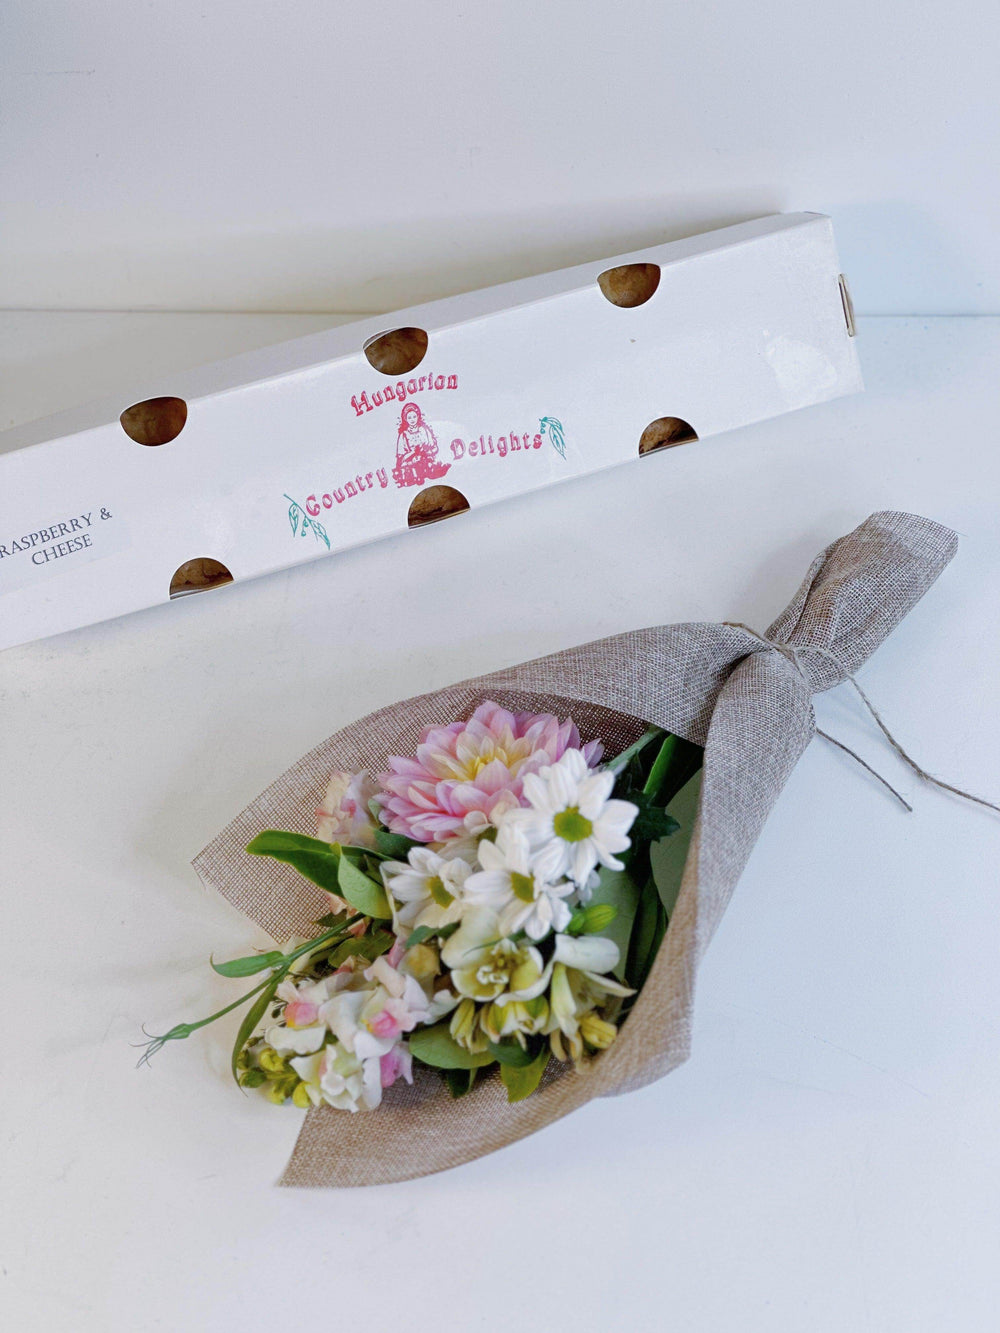 Hungarian Strudel Cheese Cake & Flower Bundle shot by The Little Market Bunch in Melbourne.